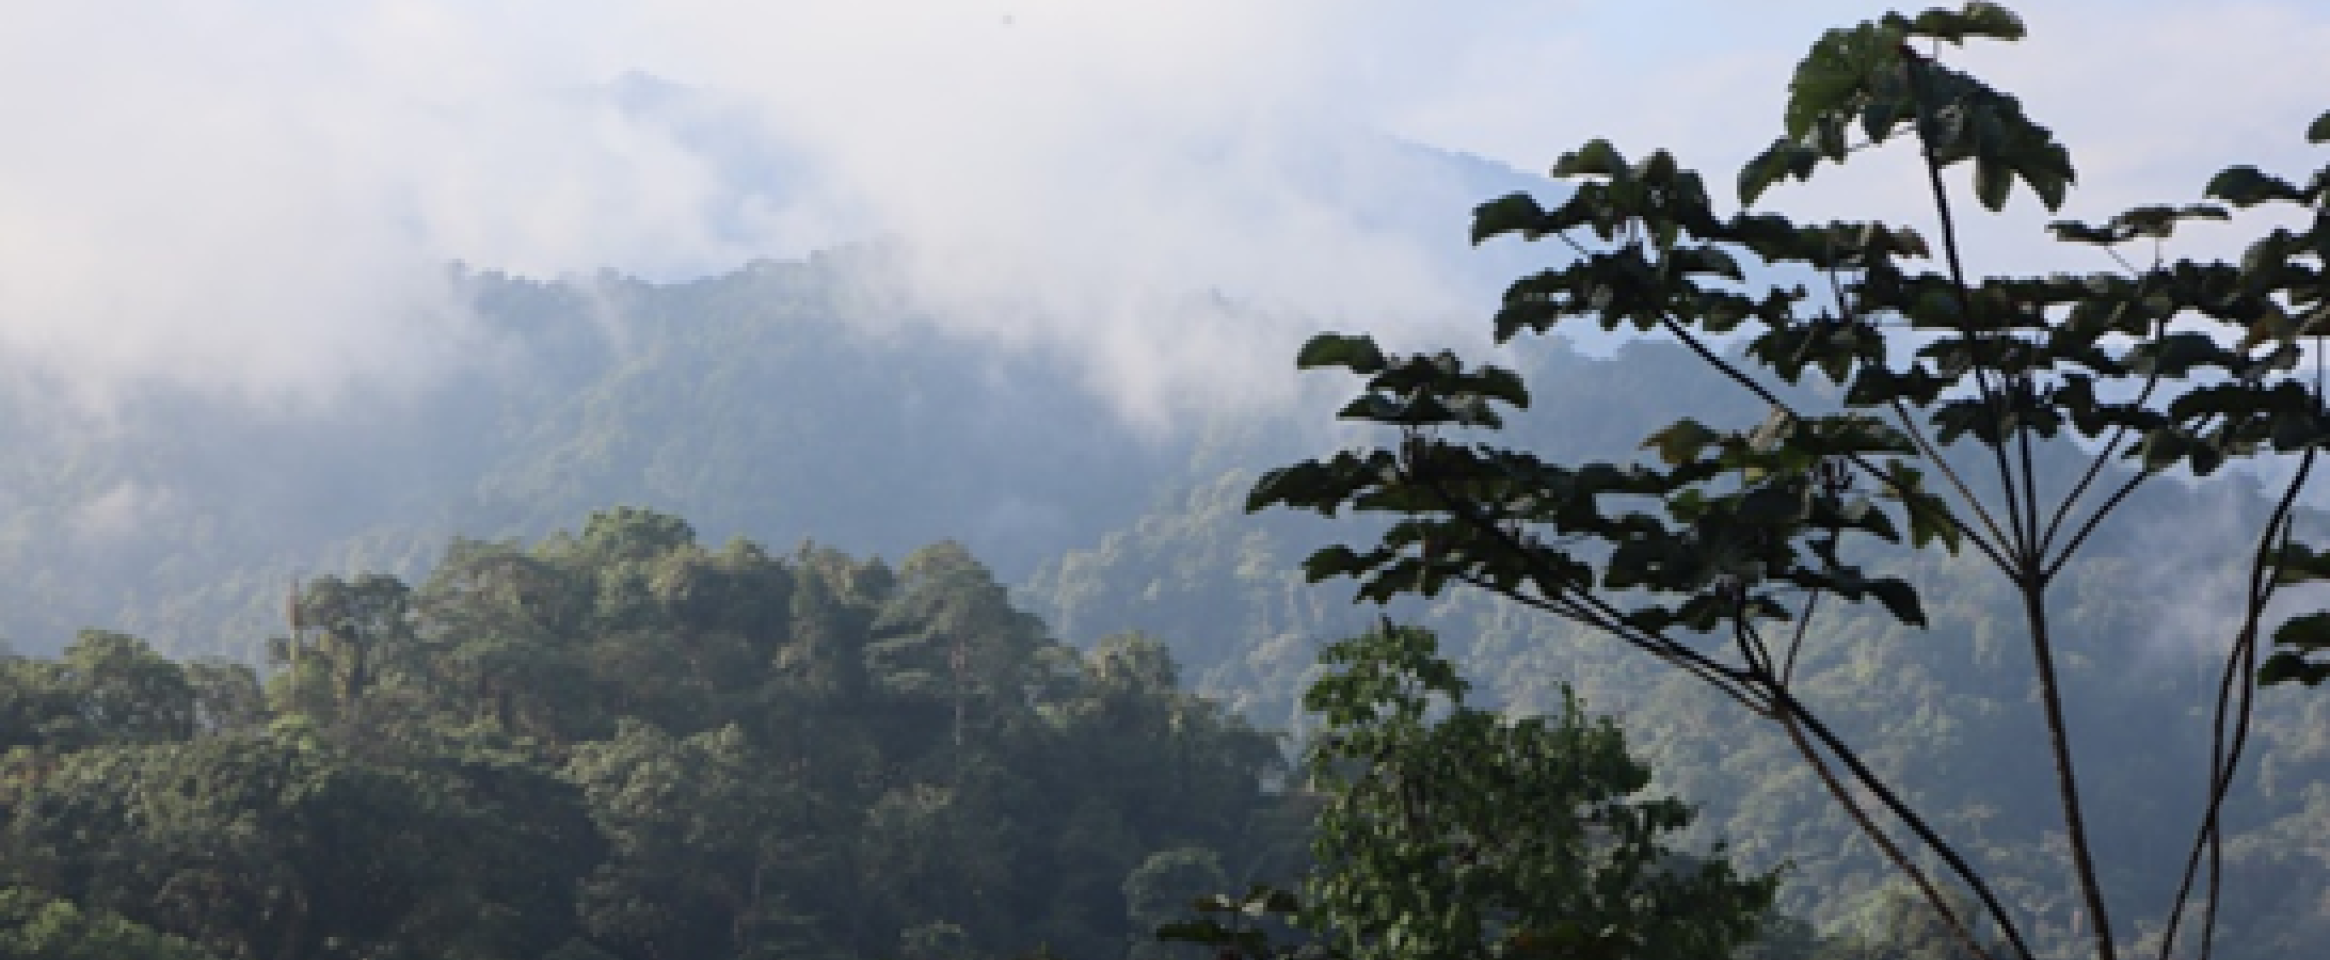 The Amazon rainforest is home to approximately 390 billion trees. However, each of those trees is at risk of being lost unless scientists approach conservation with the transdisciplinary mindset advocated by Stanford’s Zavaleta, which integrates traditional science with local culture. Credit: Olivia Maule